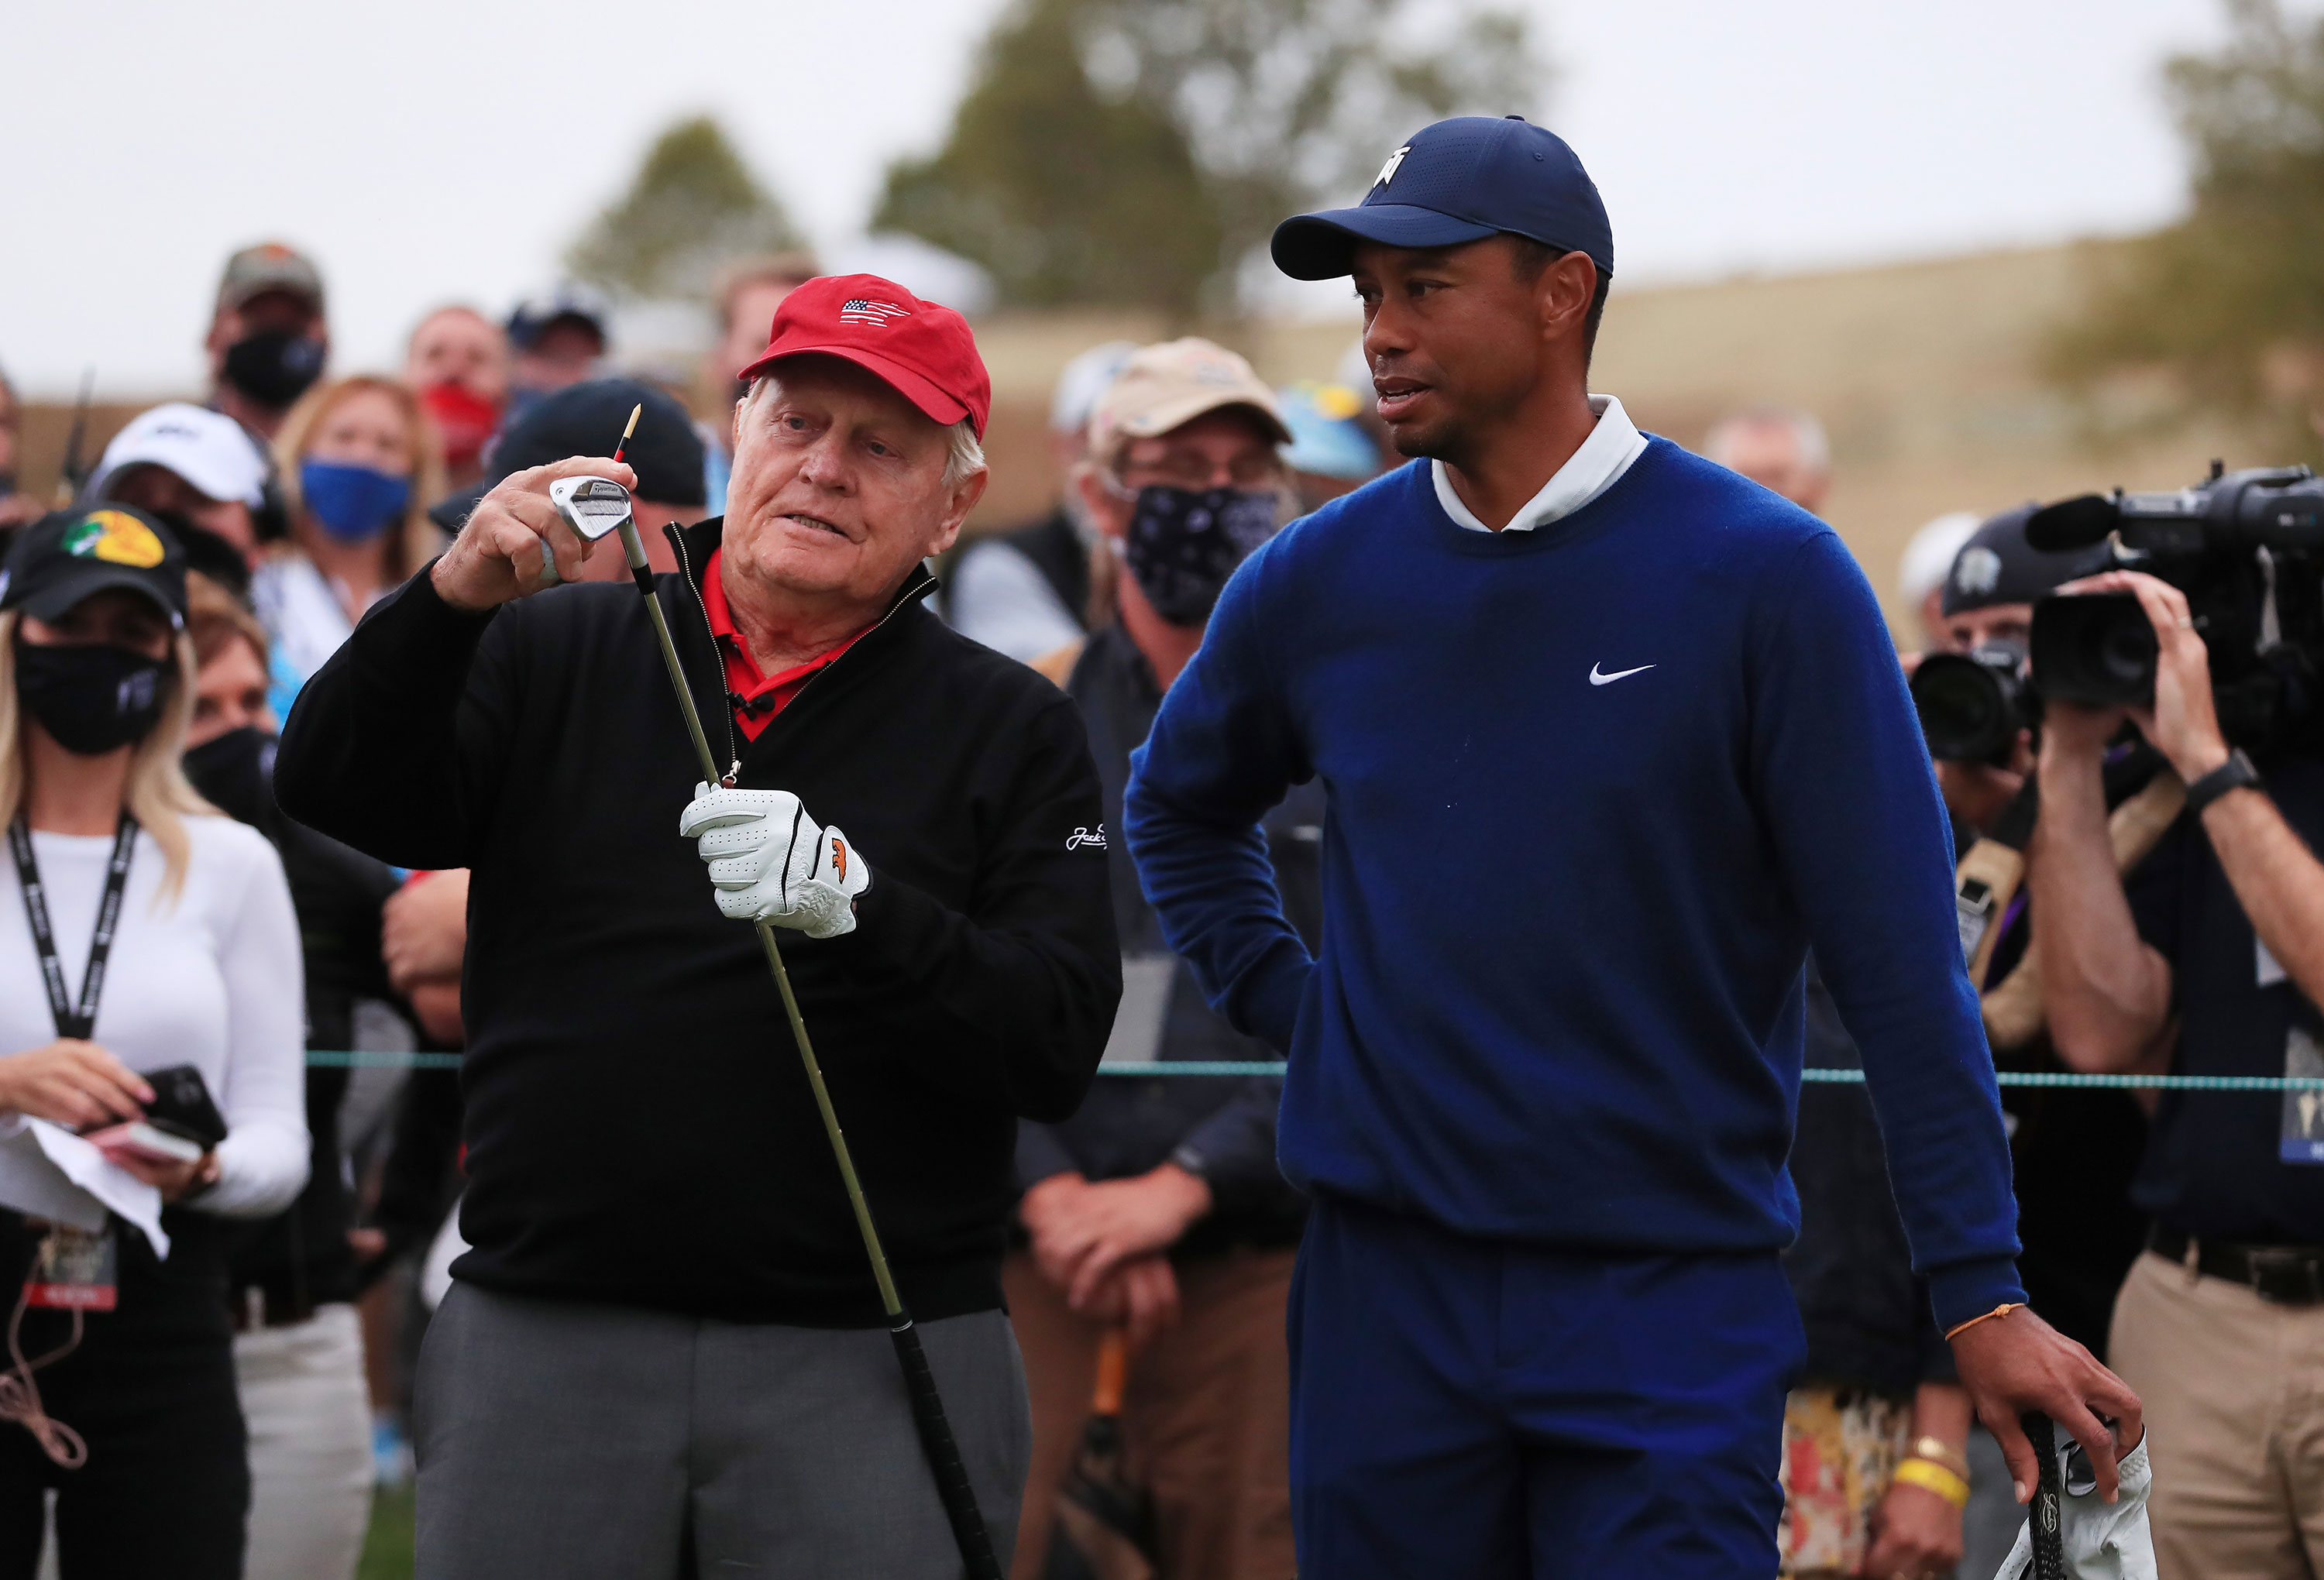 Jack Nicklaus talks to Tiger Woods during the Payne’s Valley Cup on September 22 in Ridgedale, Missouri.